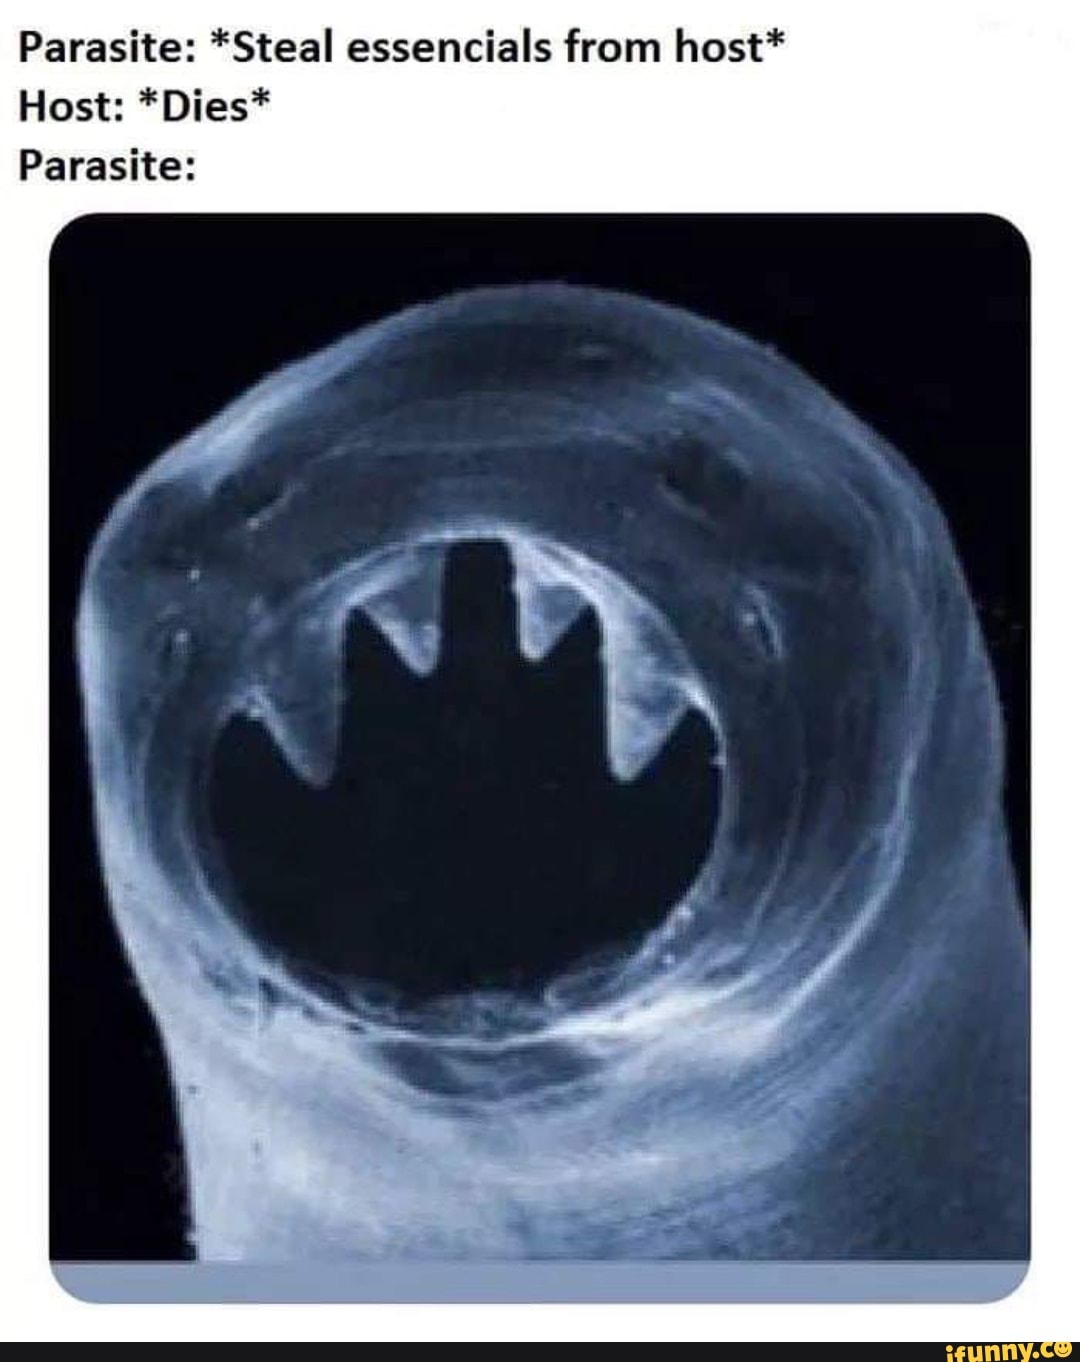 ancylostoma duodenale meme - Parasite Steal essencials from host Host Dies Parasite ifunny.co